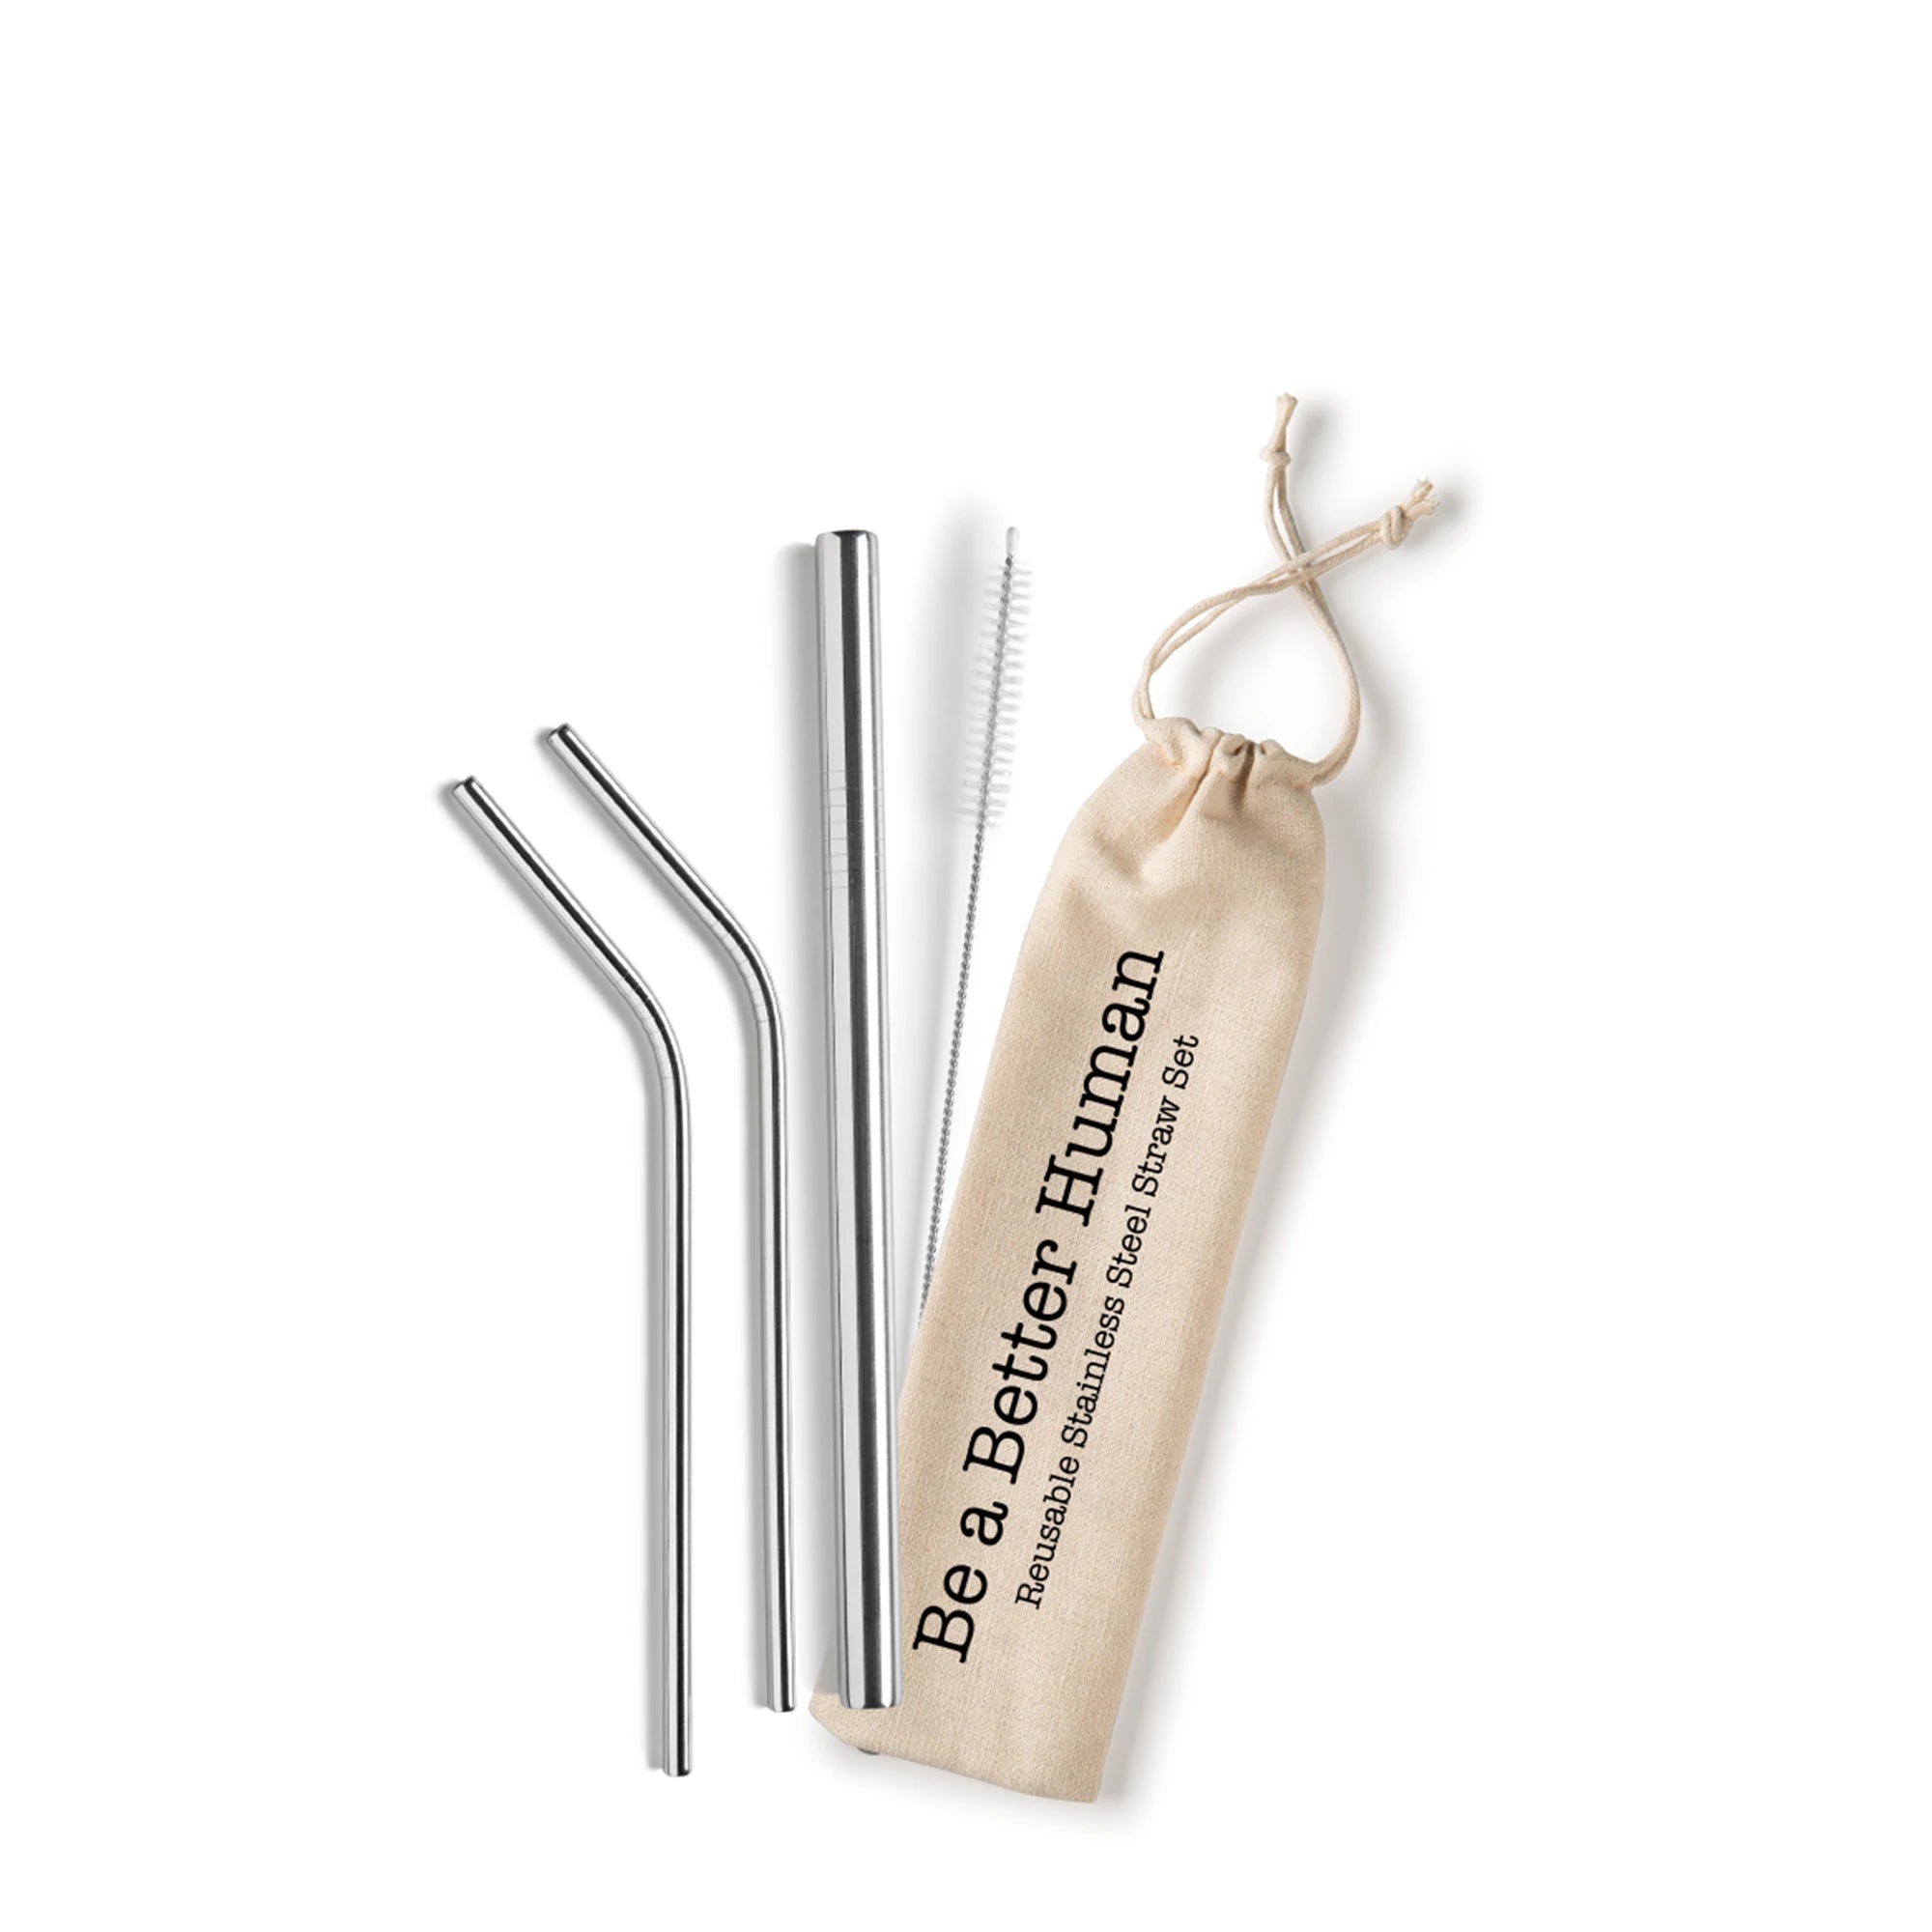 "Be a Better Human" - Stainless Steel Straw Set